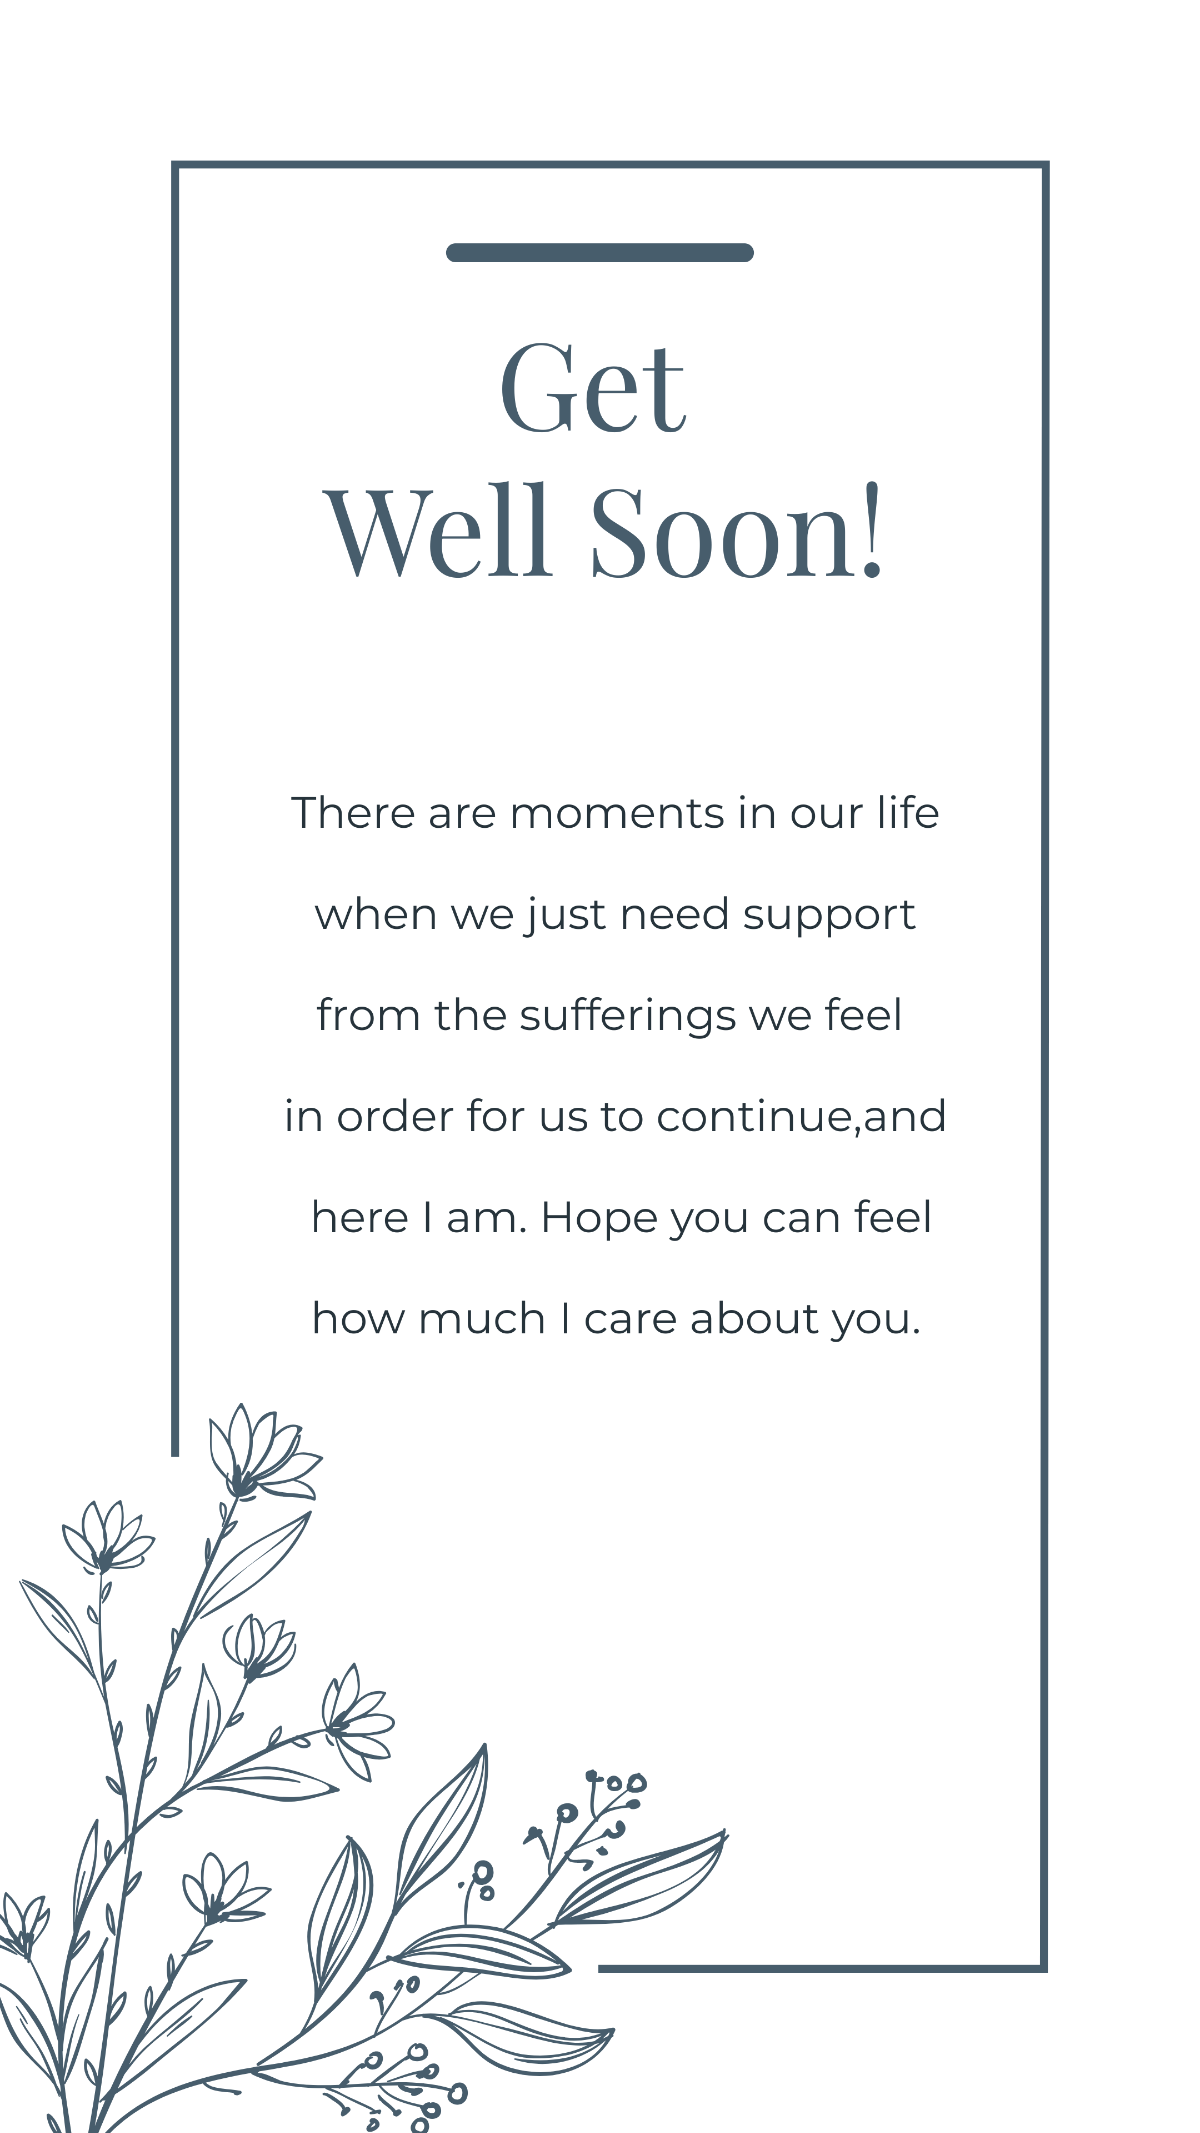 Get Well Soon Wishes Story Template